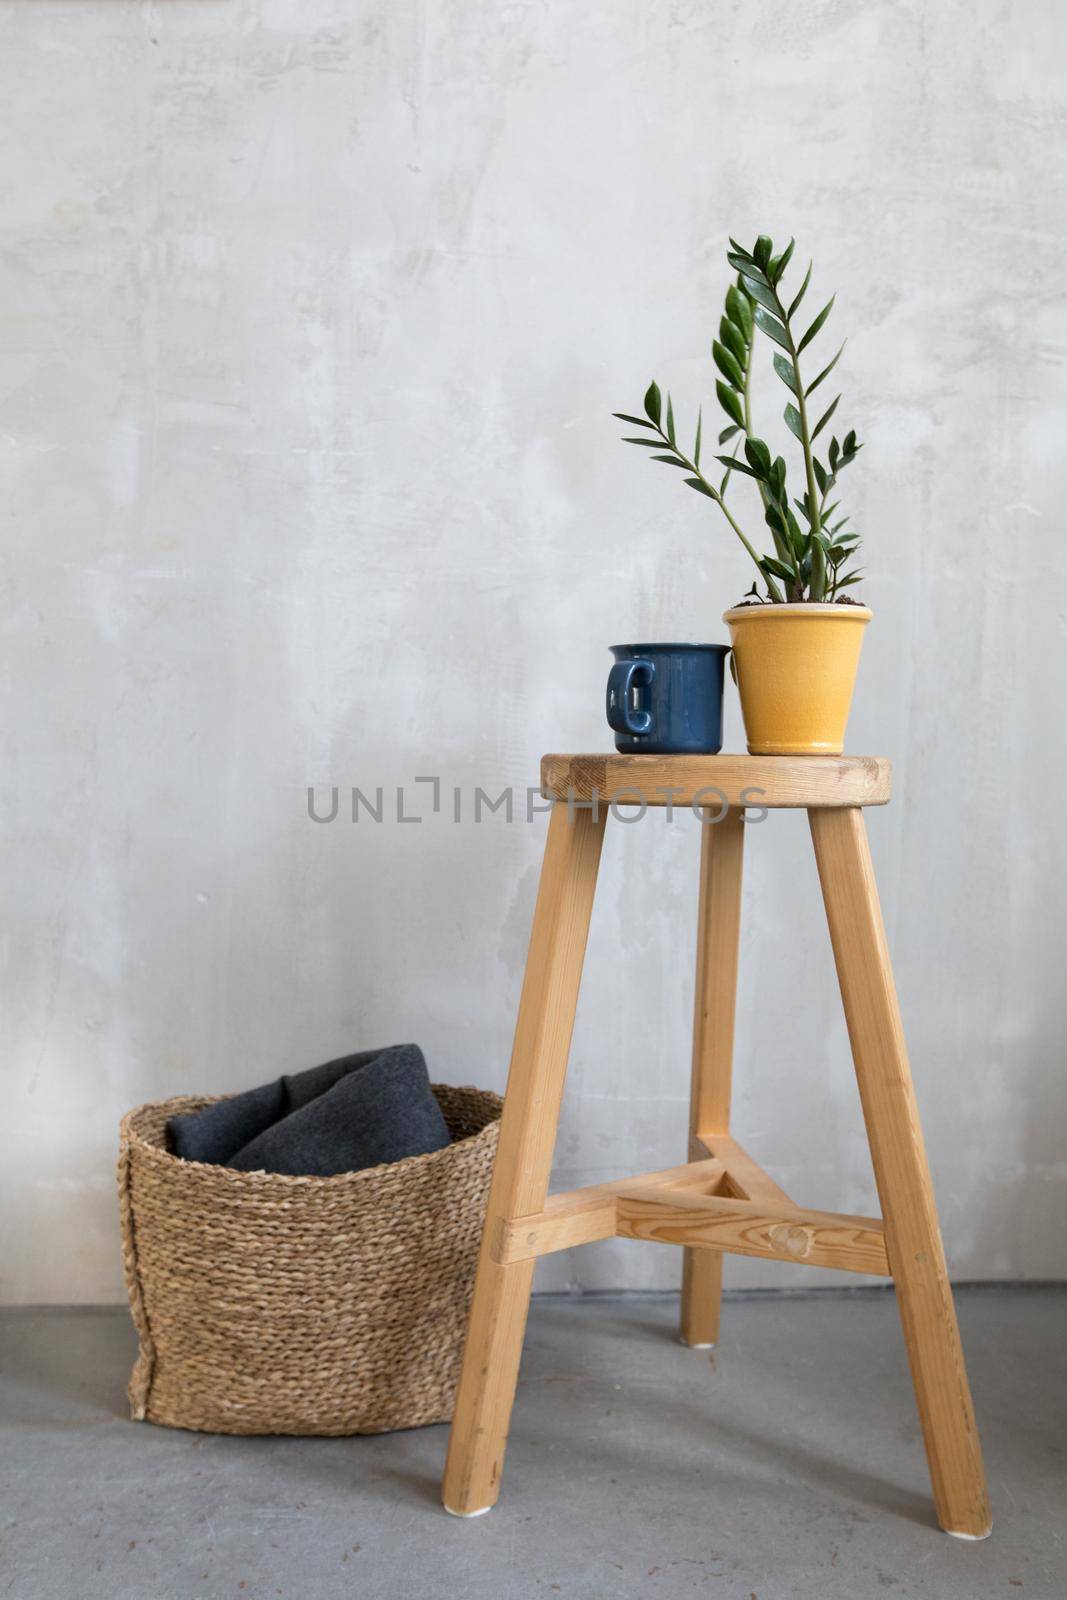 Interior shot of decorative table and basket by Demkat